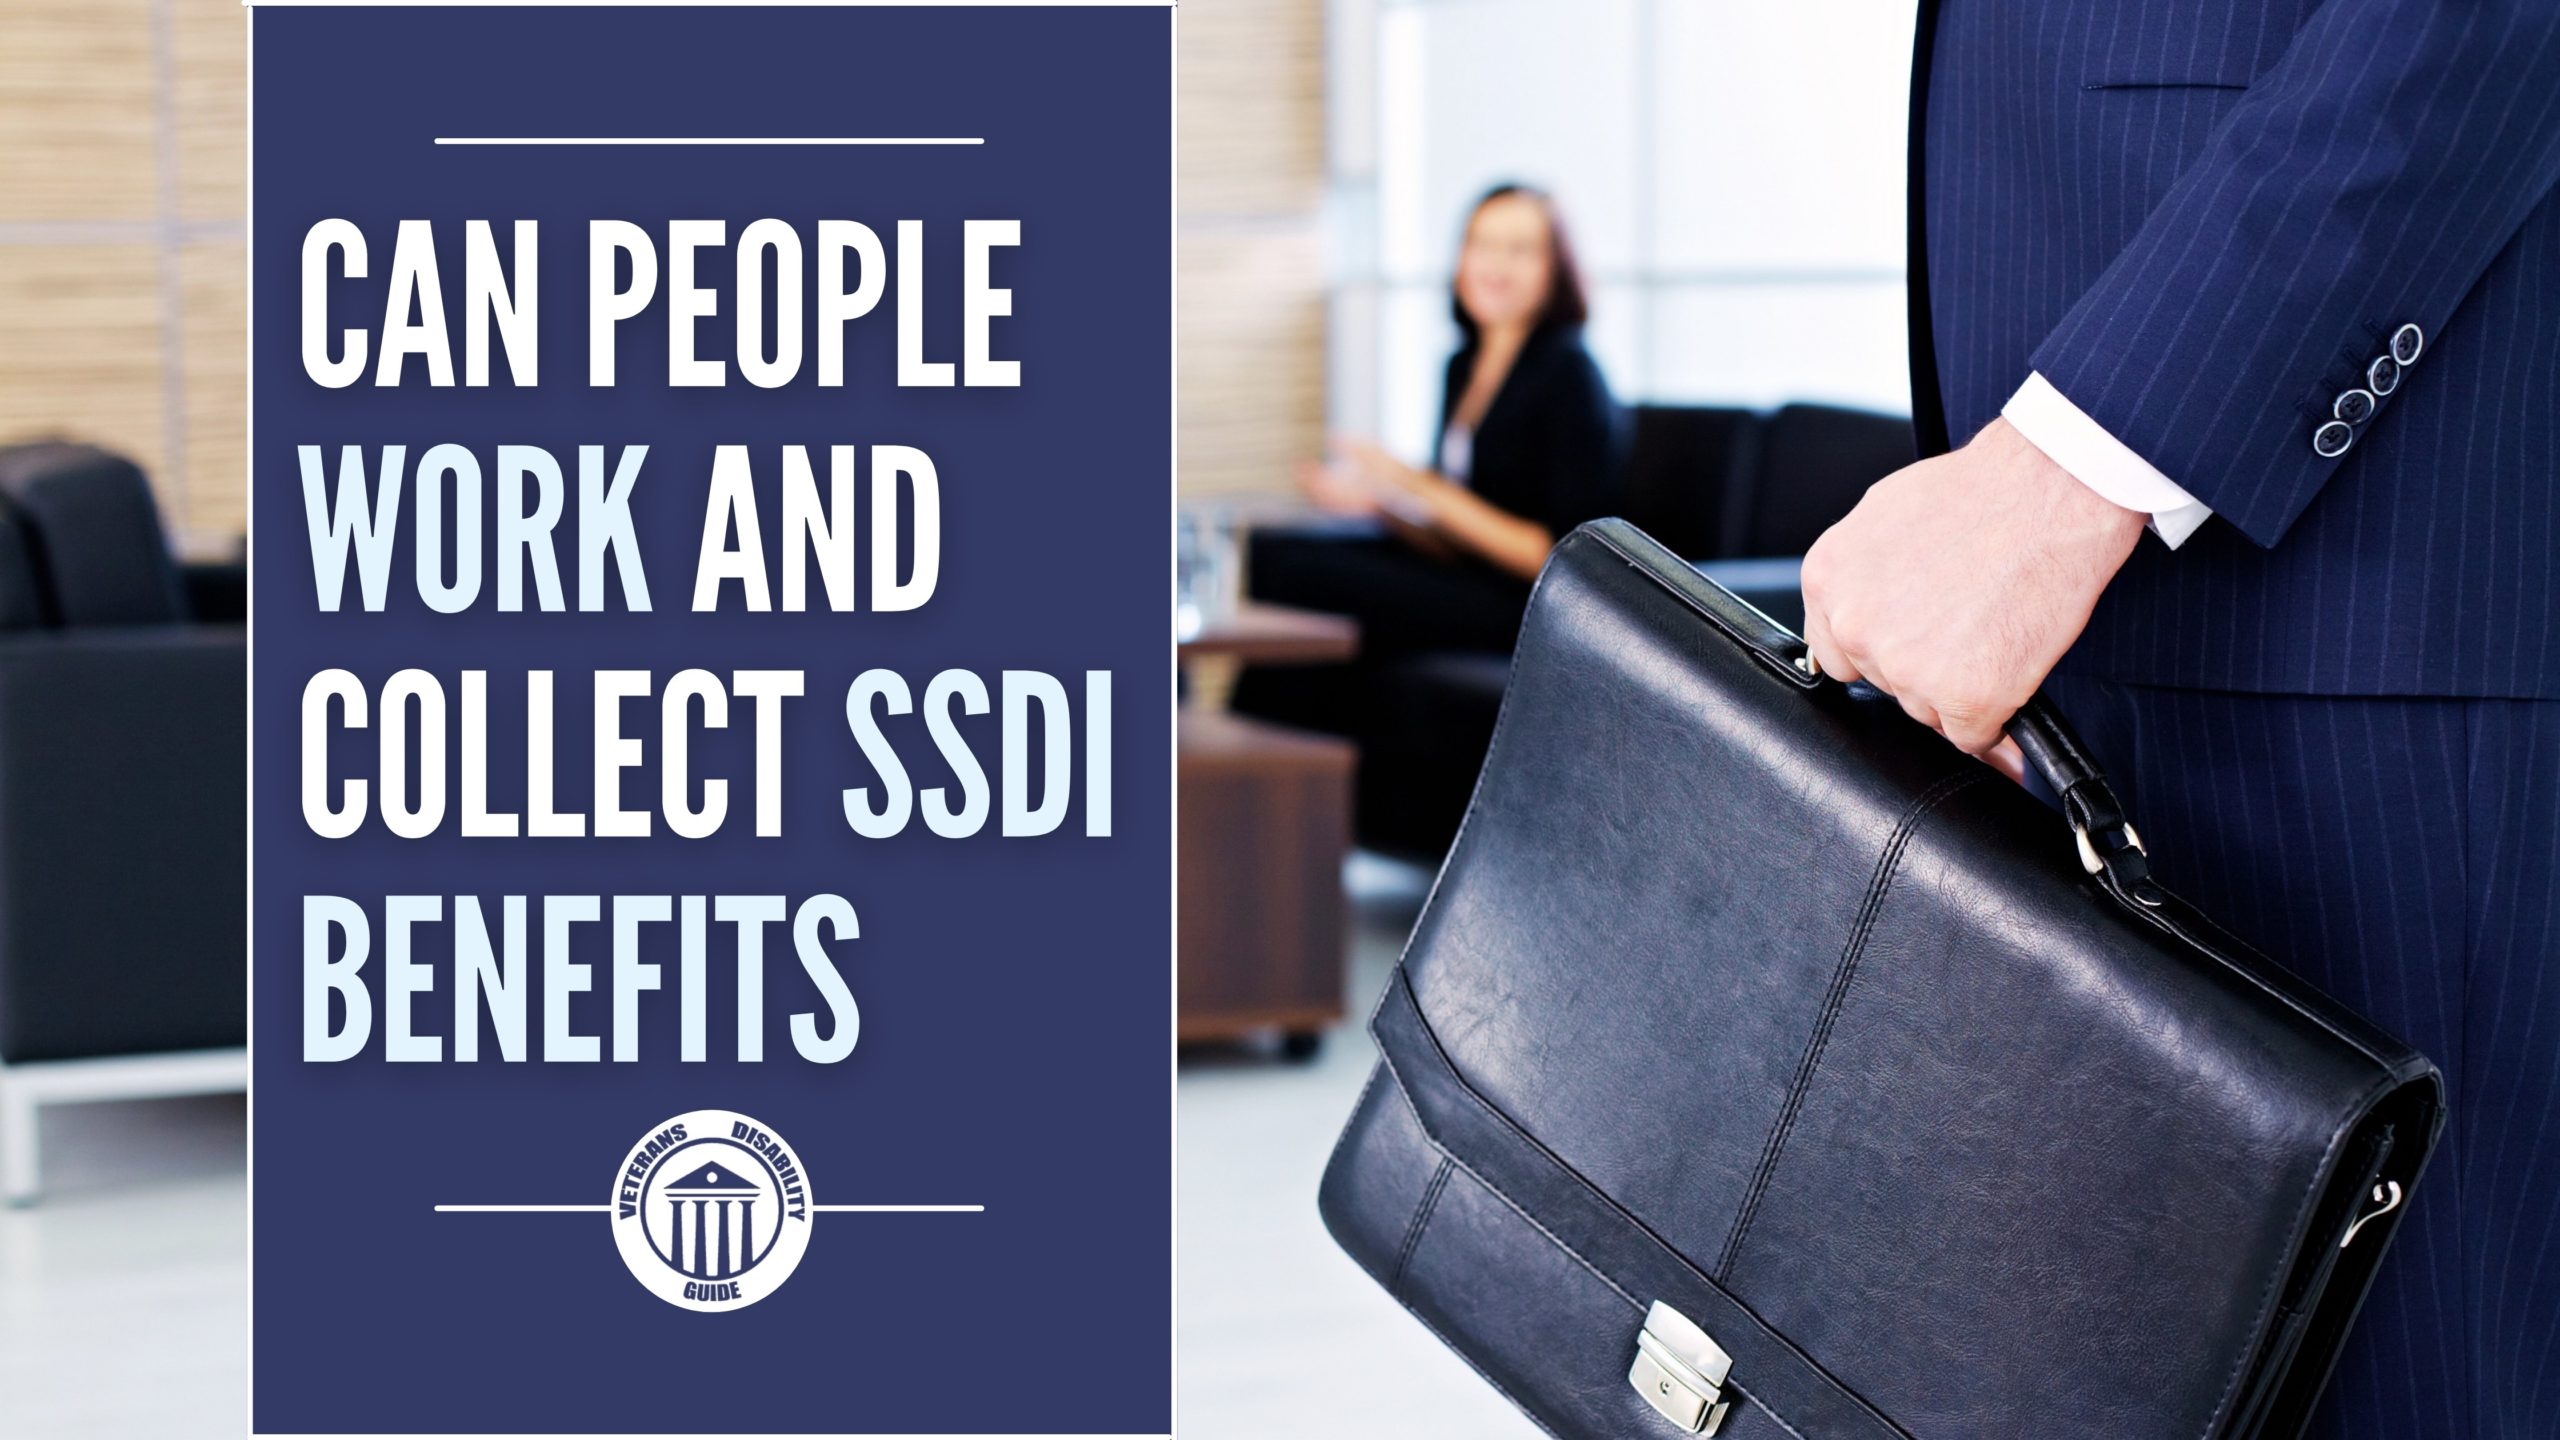 Can People Work And Collect SSDI Benefits blog header image